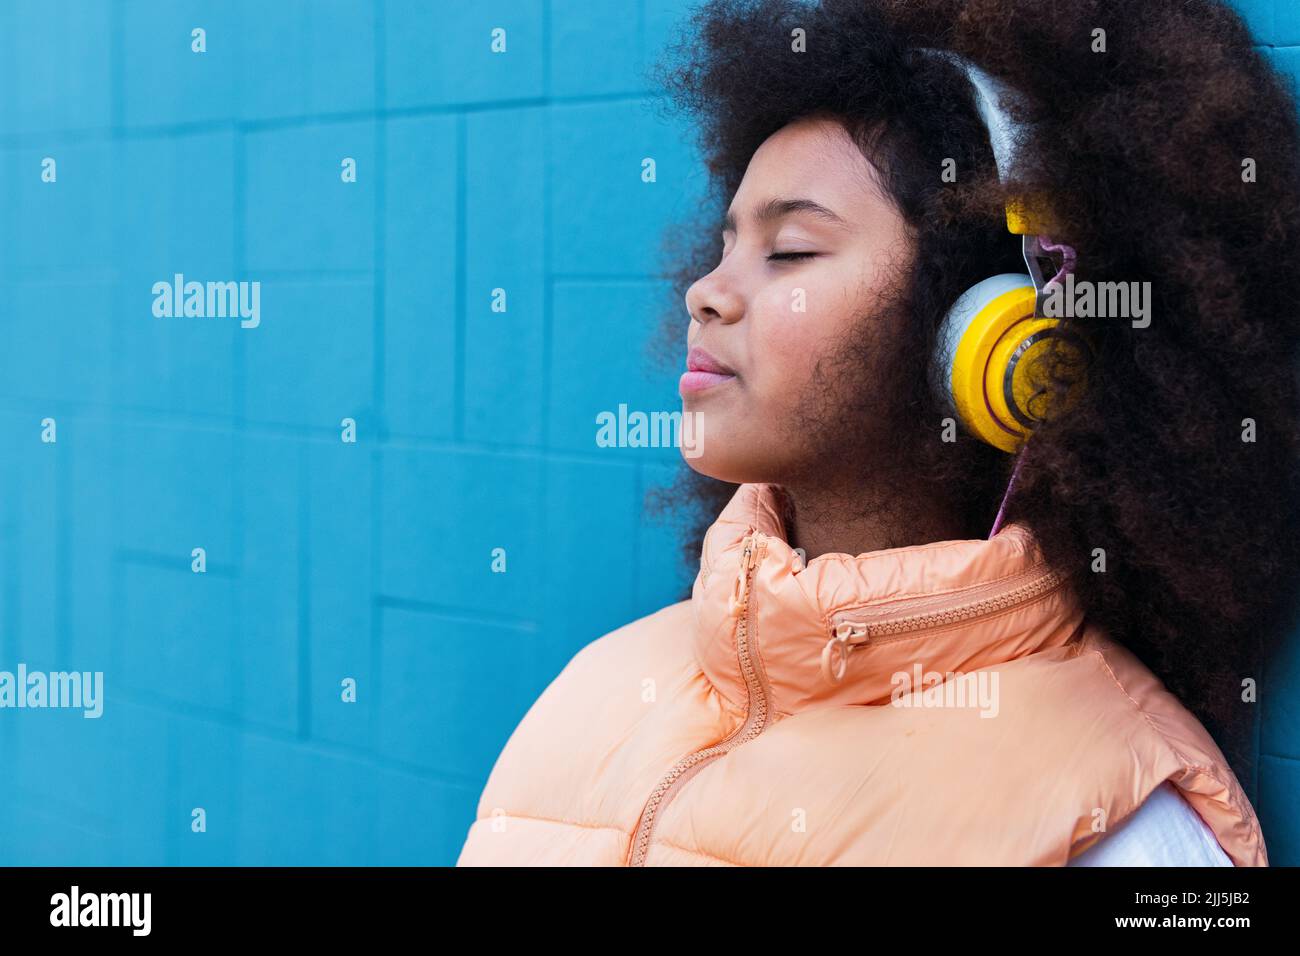 Girl with eyes closed listening music leaning on blue wall Stock Photo